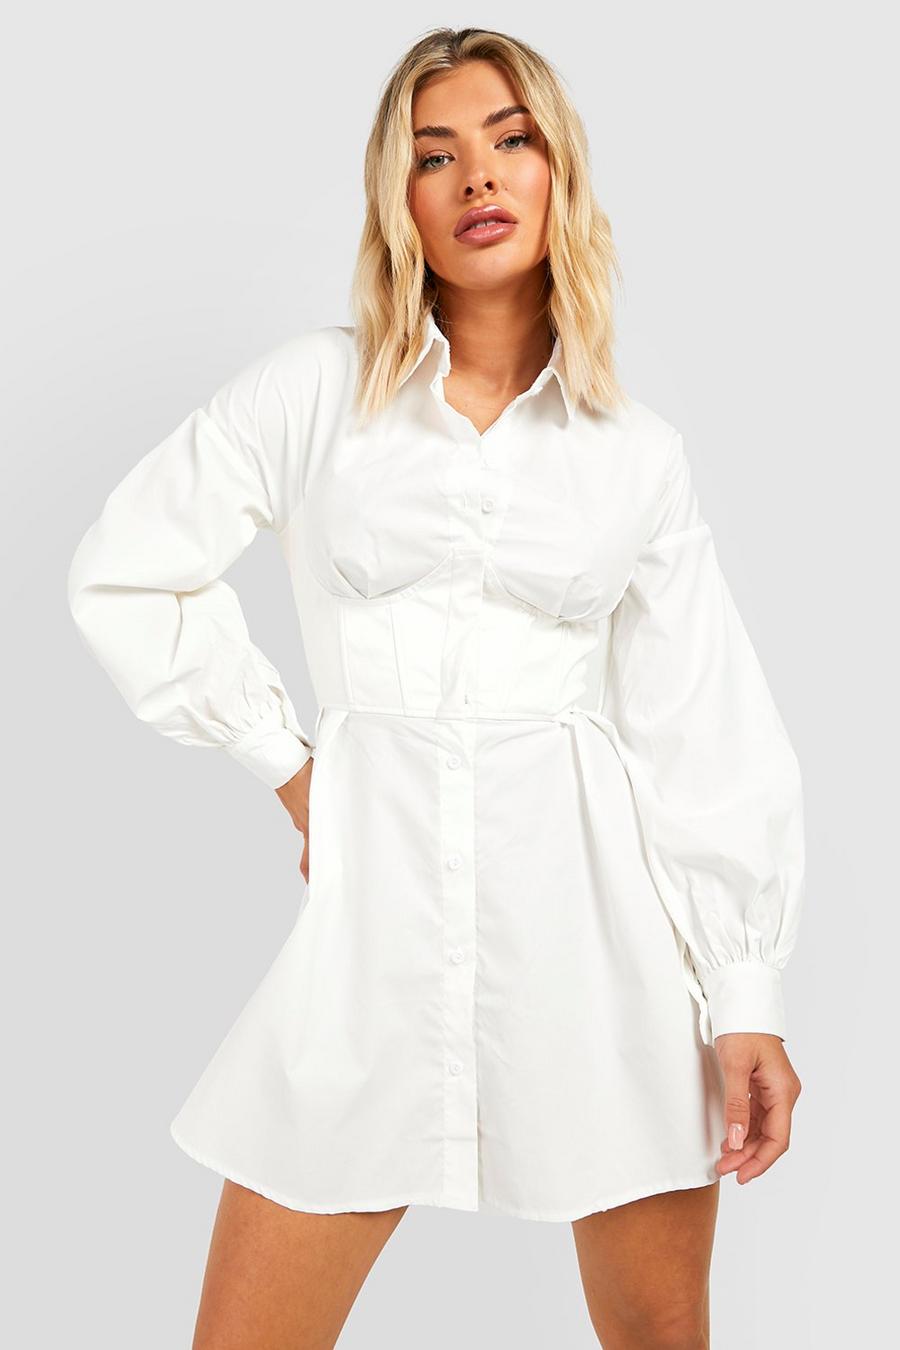 Ivory weiß Shirt Dress With Leather Look Corset